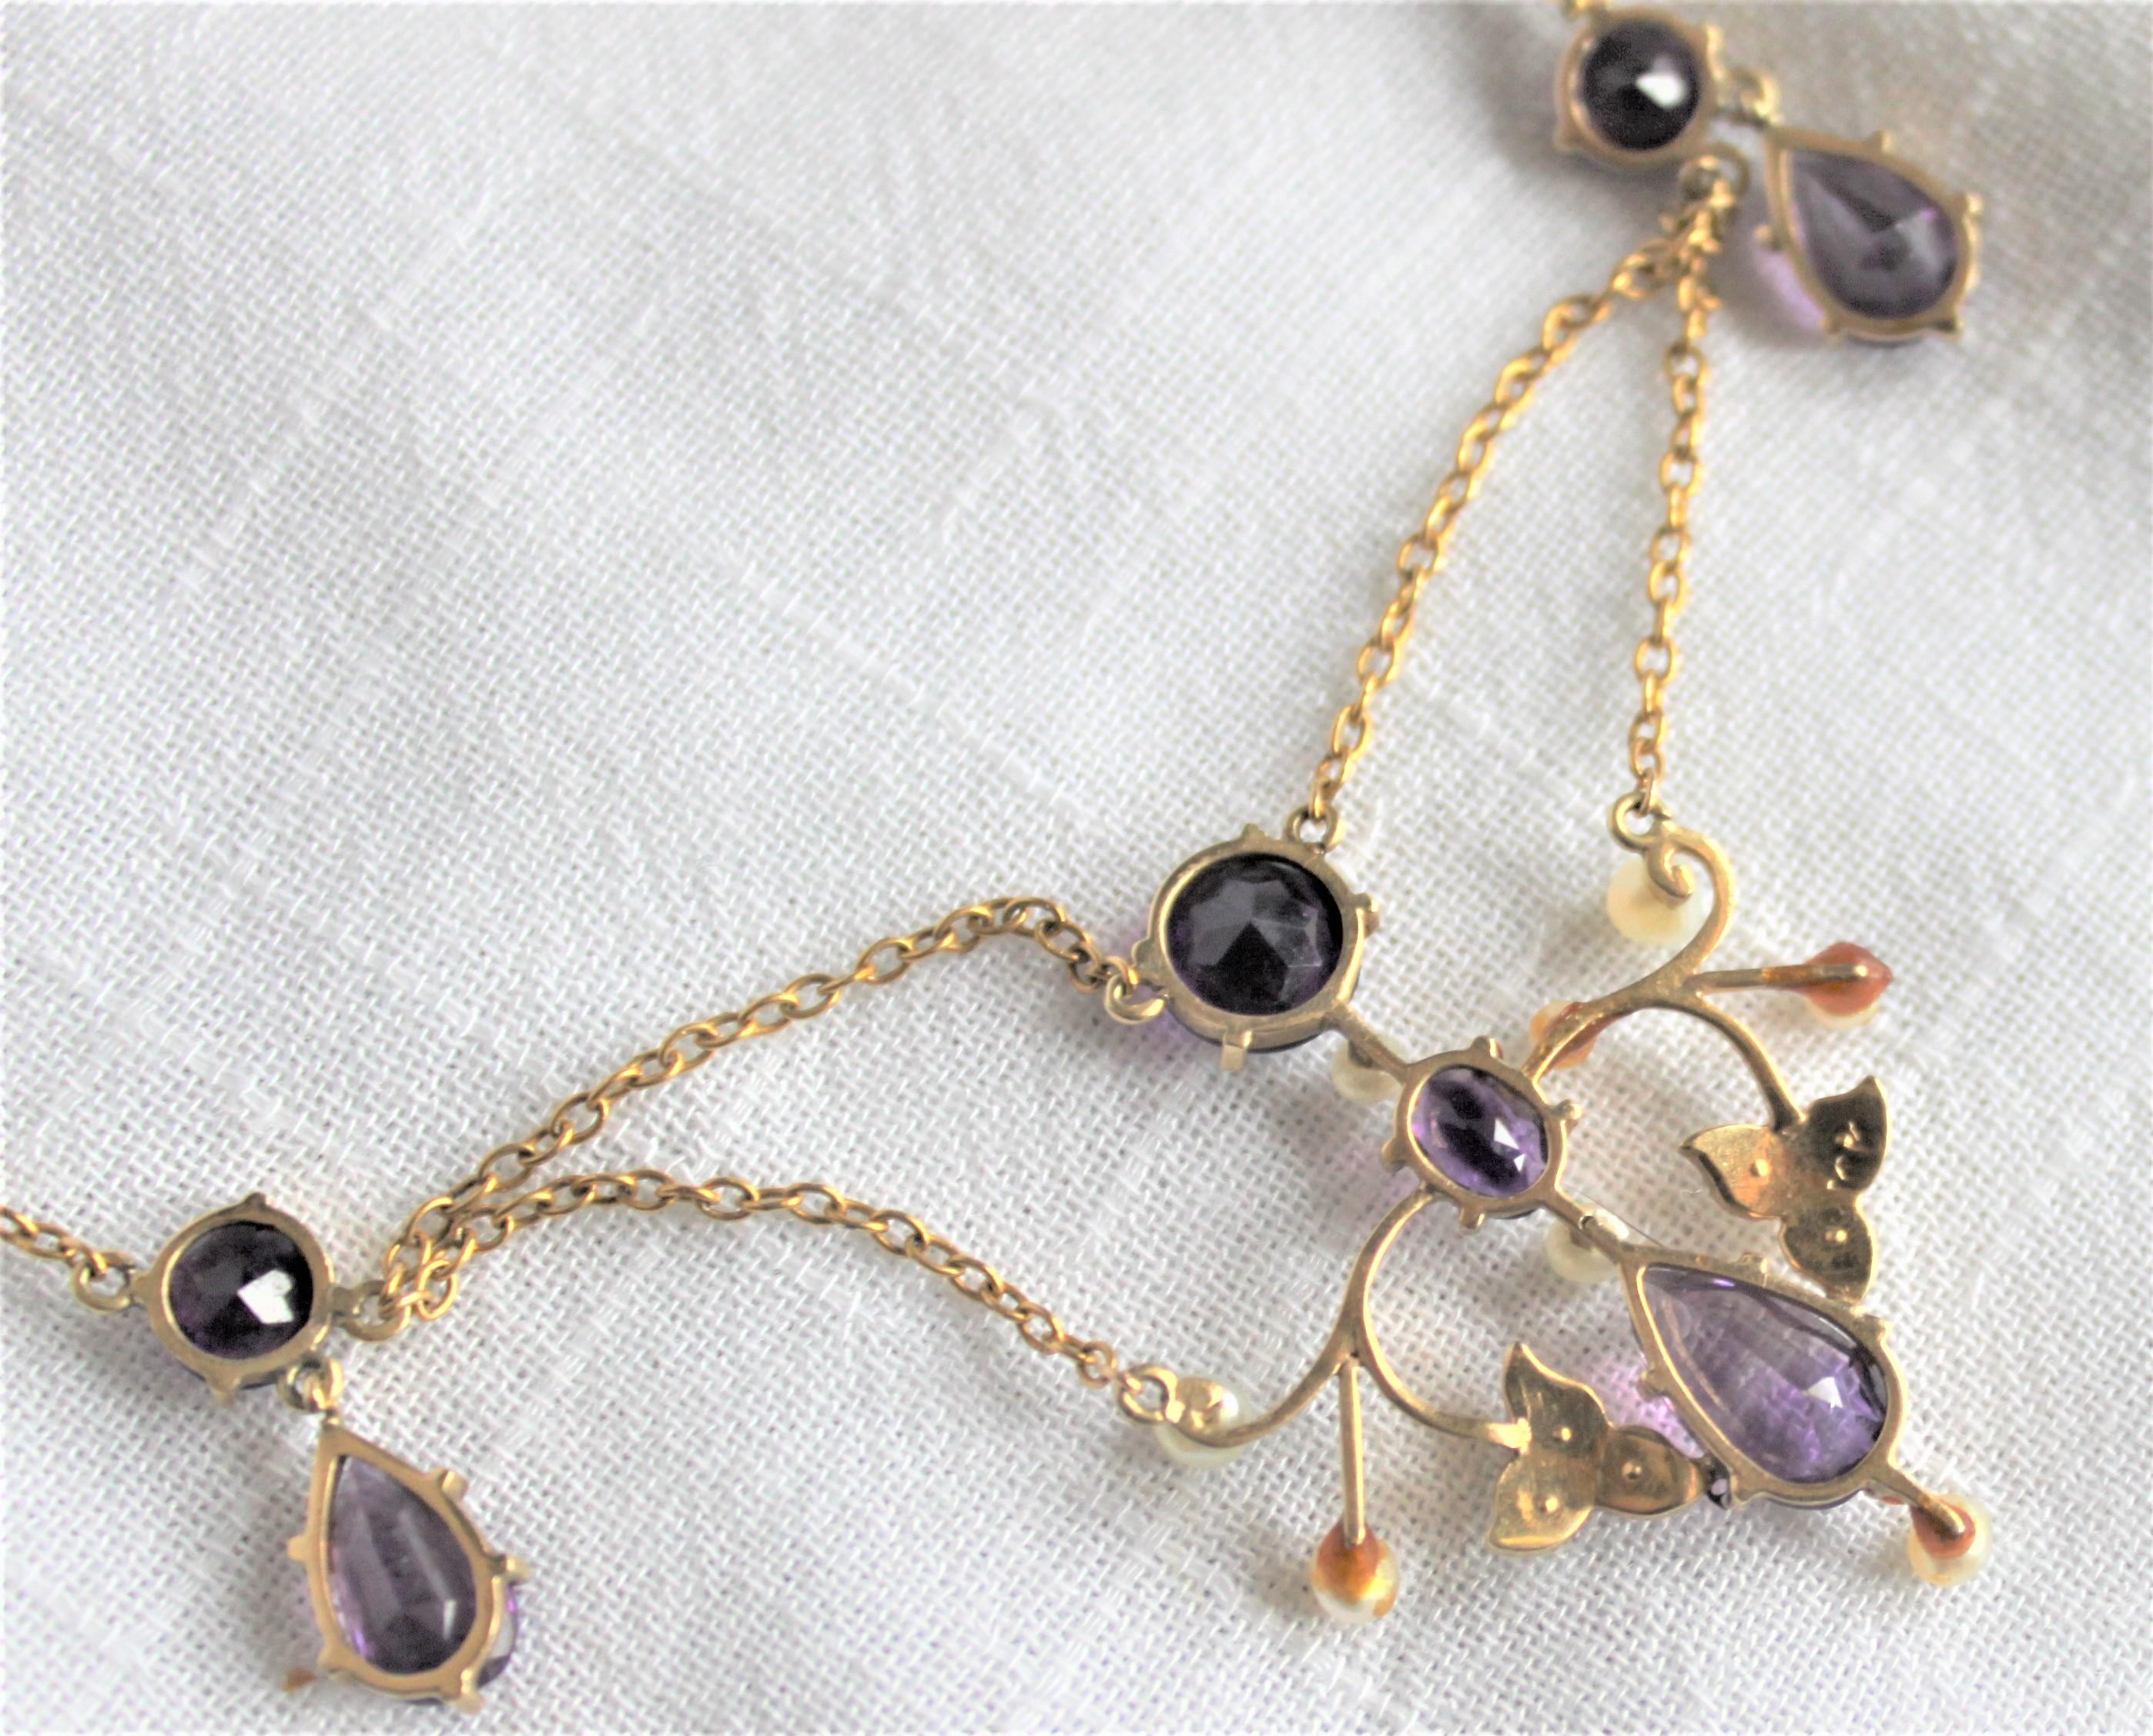 Antique 14-Karat Yellow Gold, Amethyst and Seed Pearl Necklace and Brooch For Sale 3